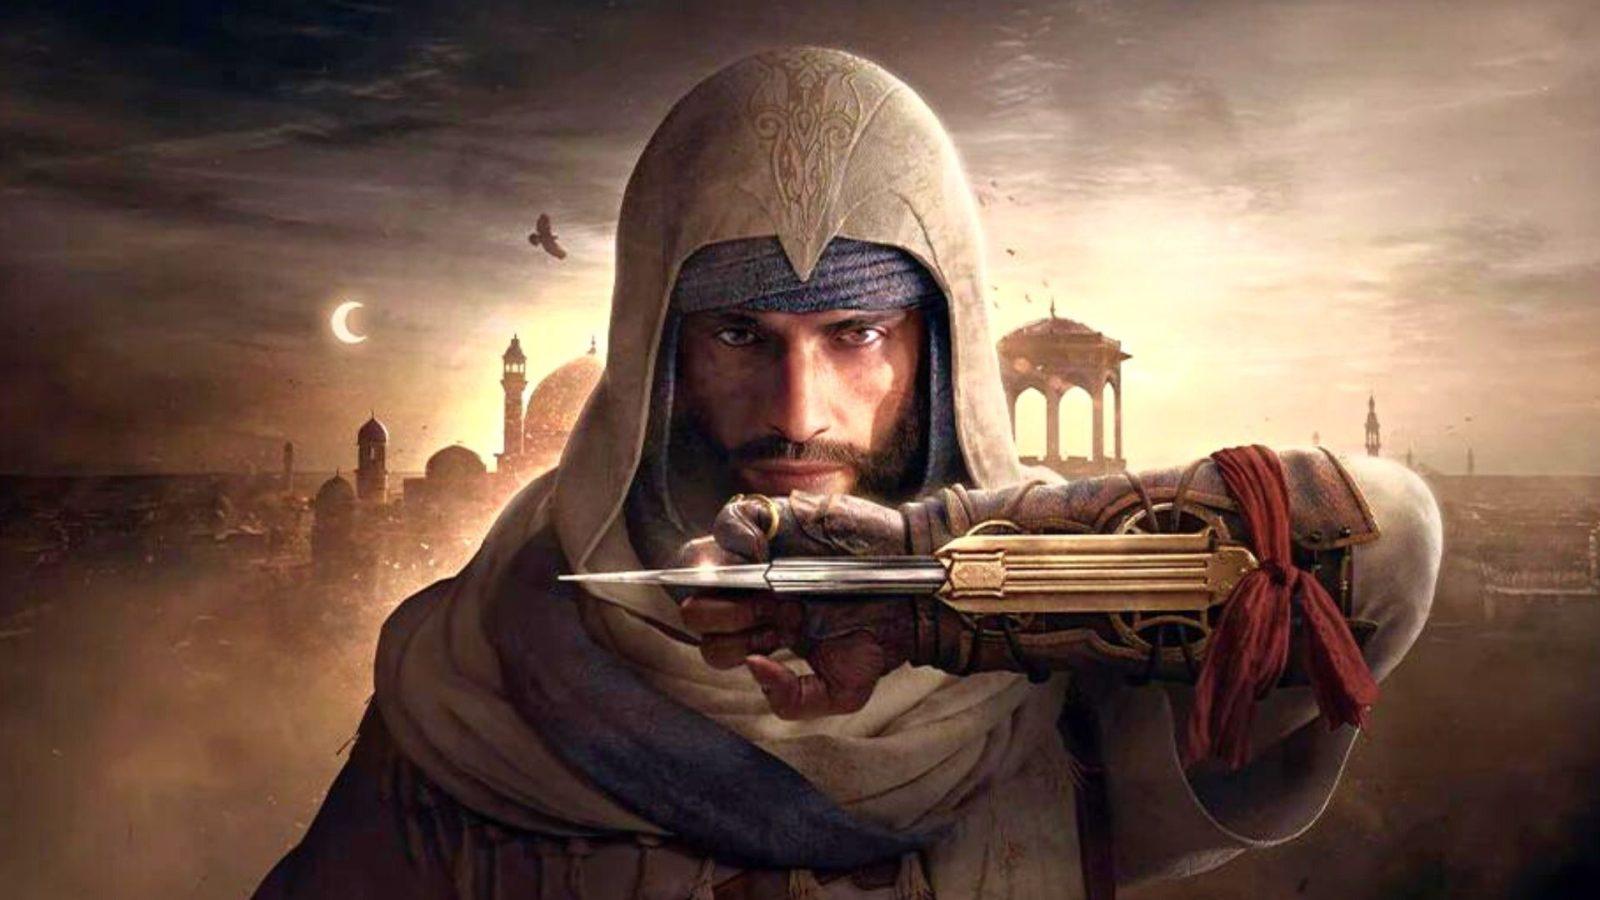 basim holding up weapon in assassin's creed mirage